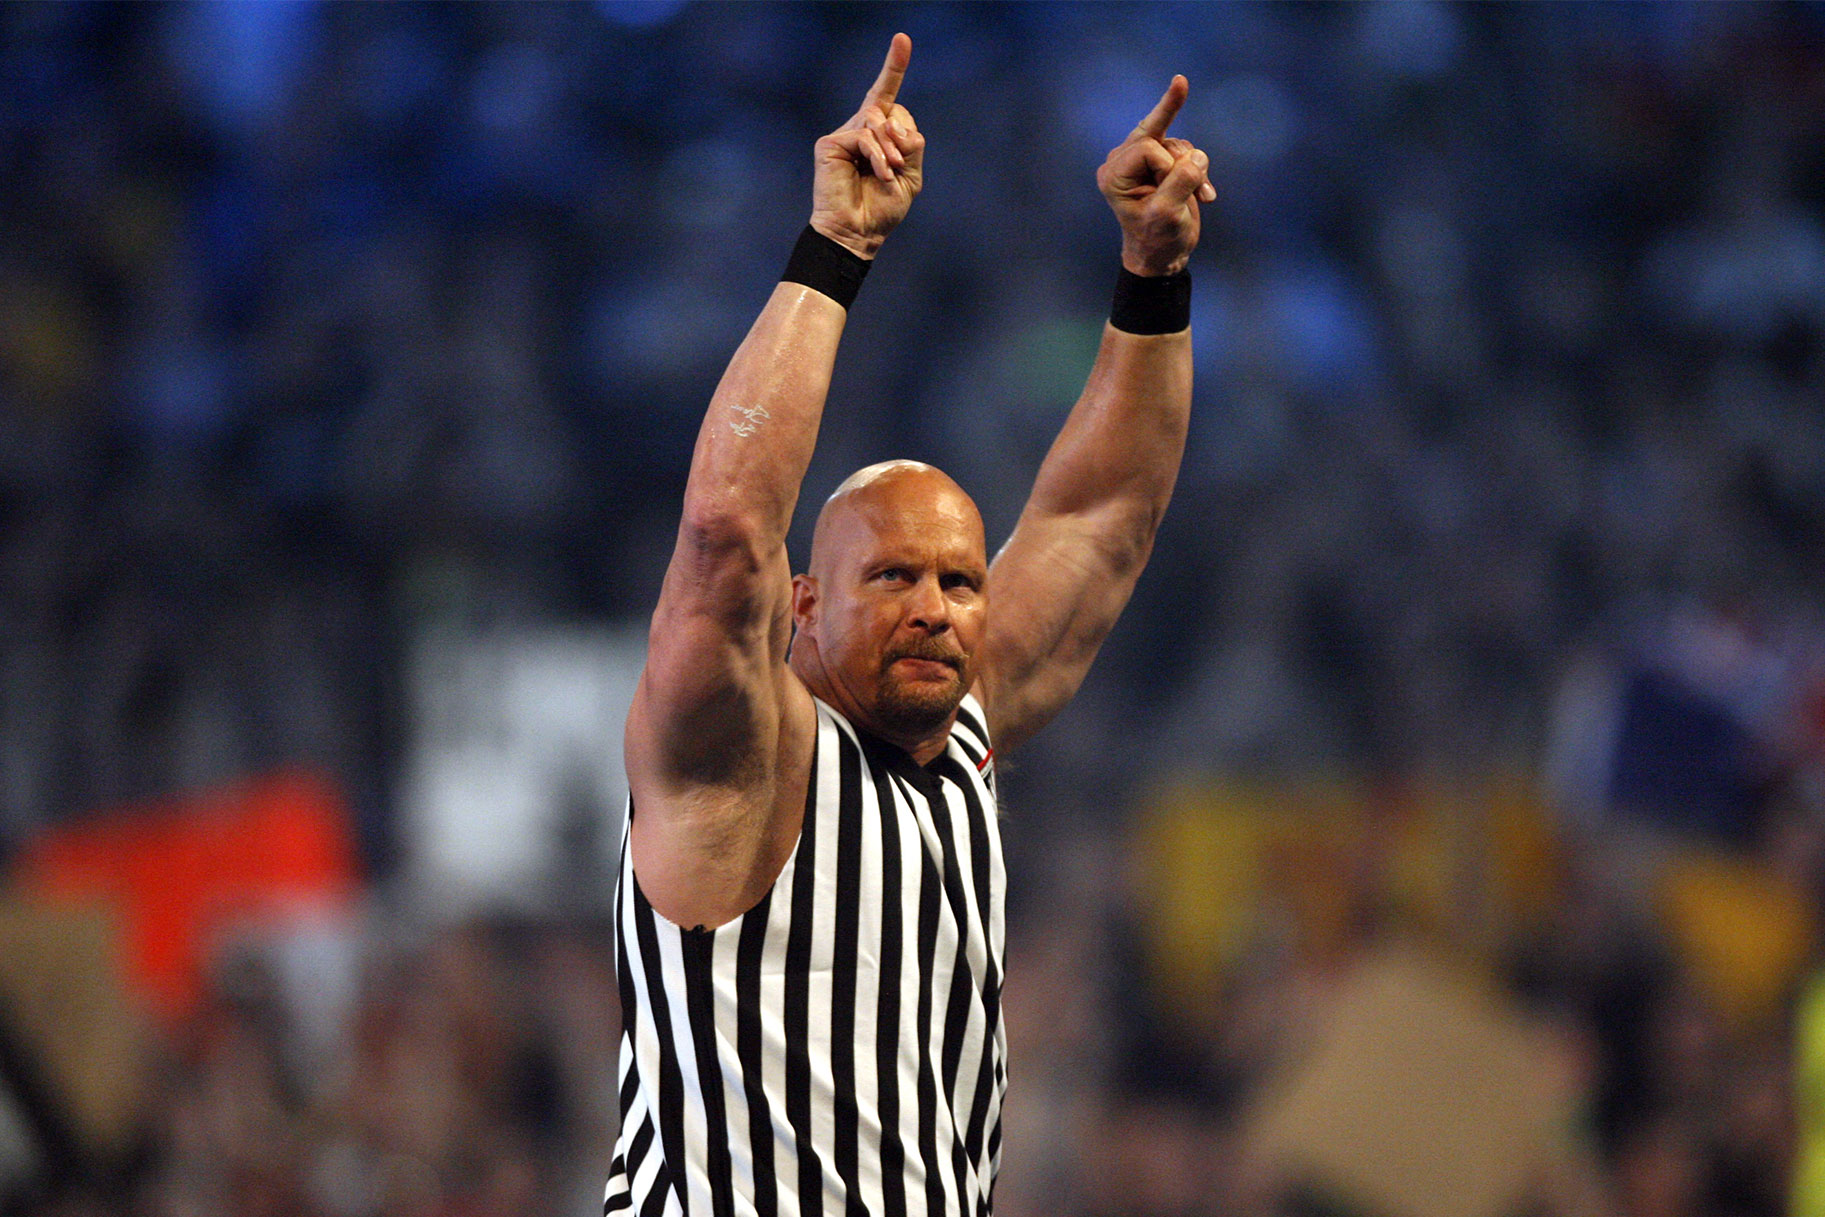 Stone Cold Sticking his middle fingers up